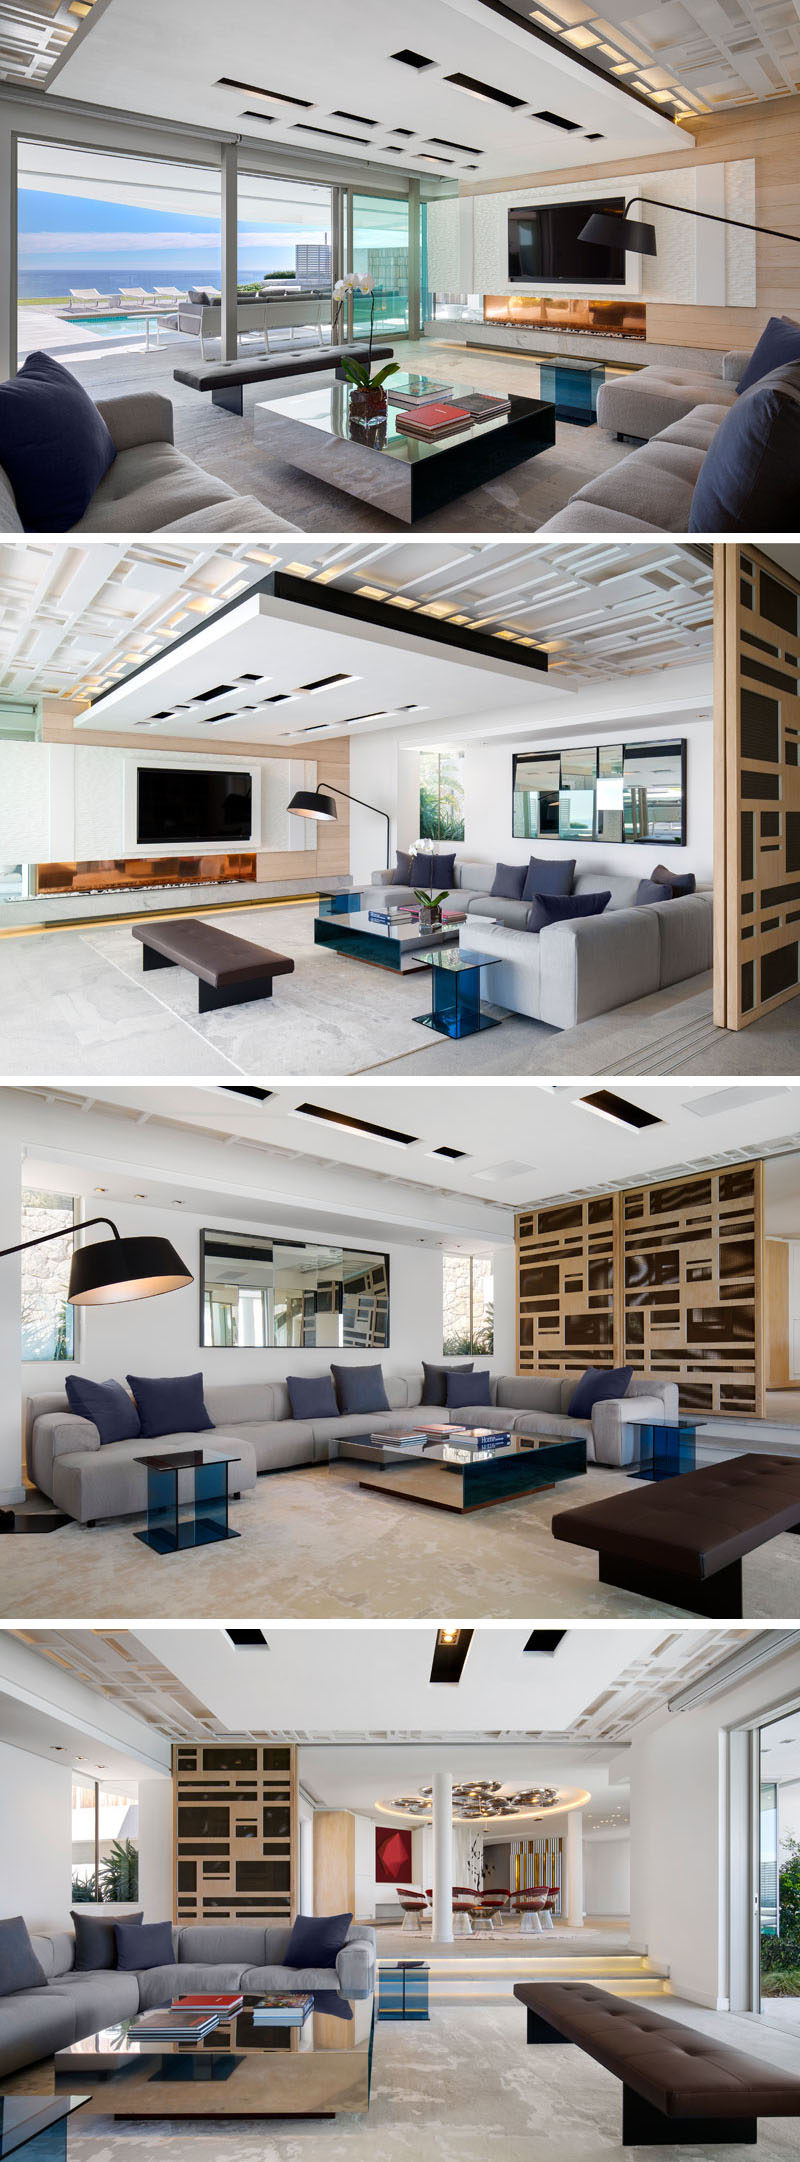 This modern house has an informal lounge with sliding glass doors that open to the pool deck and a BBQ area. A decorative ceiling detail draws your eye upward, making the room feel taller. #LivingRoom #InformalLounge #ModernInteriorDesign